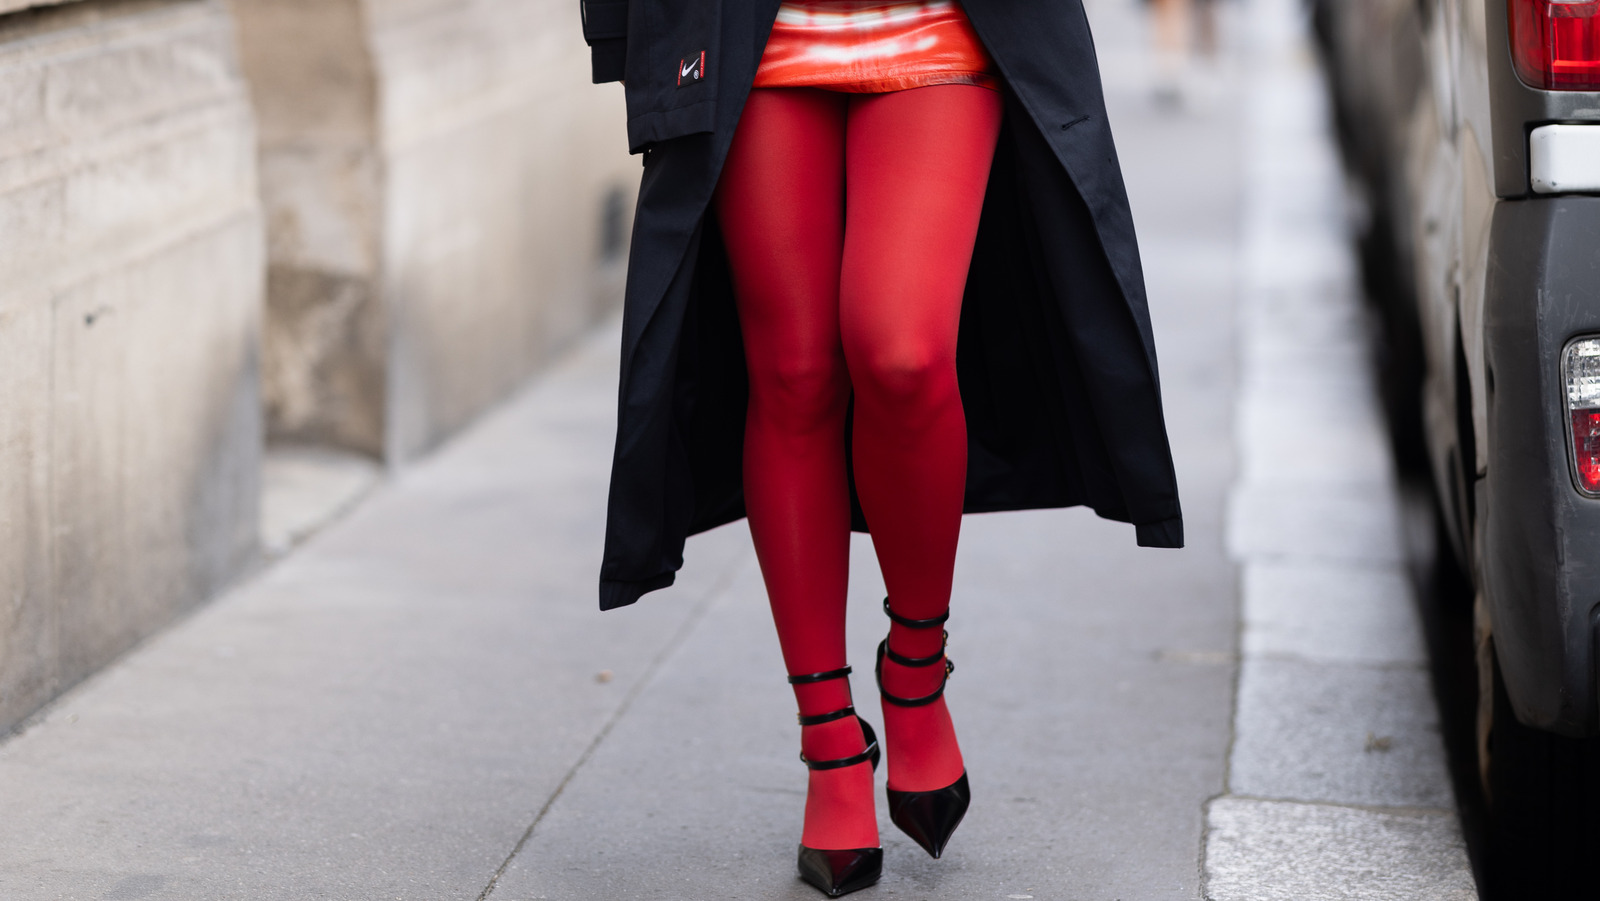 https://www.glam.com/img/gallery/colorful-tights-are-back-in-style-for-fall-2023-our-best-styling-tips/l-intro-1697996314.jpg